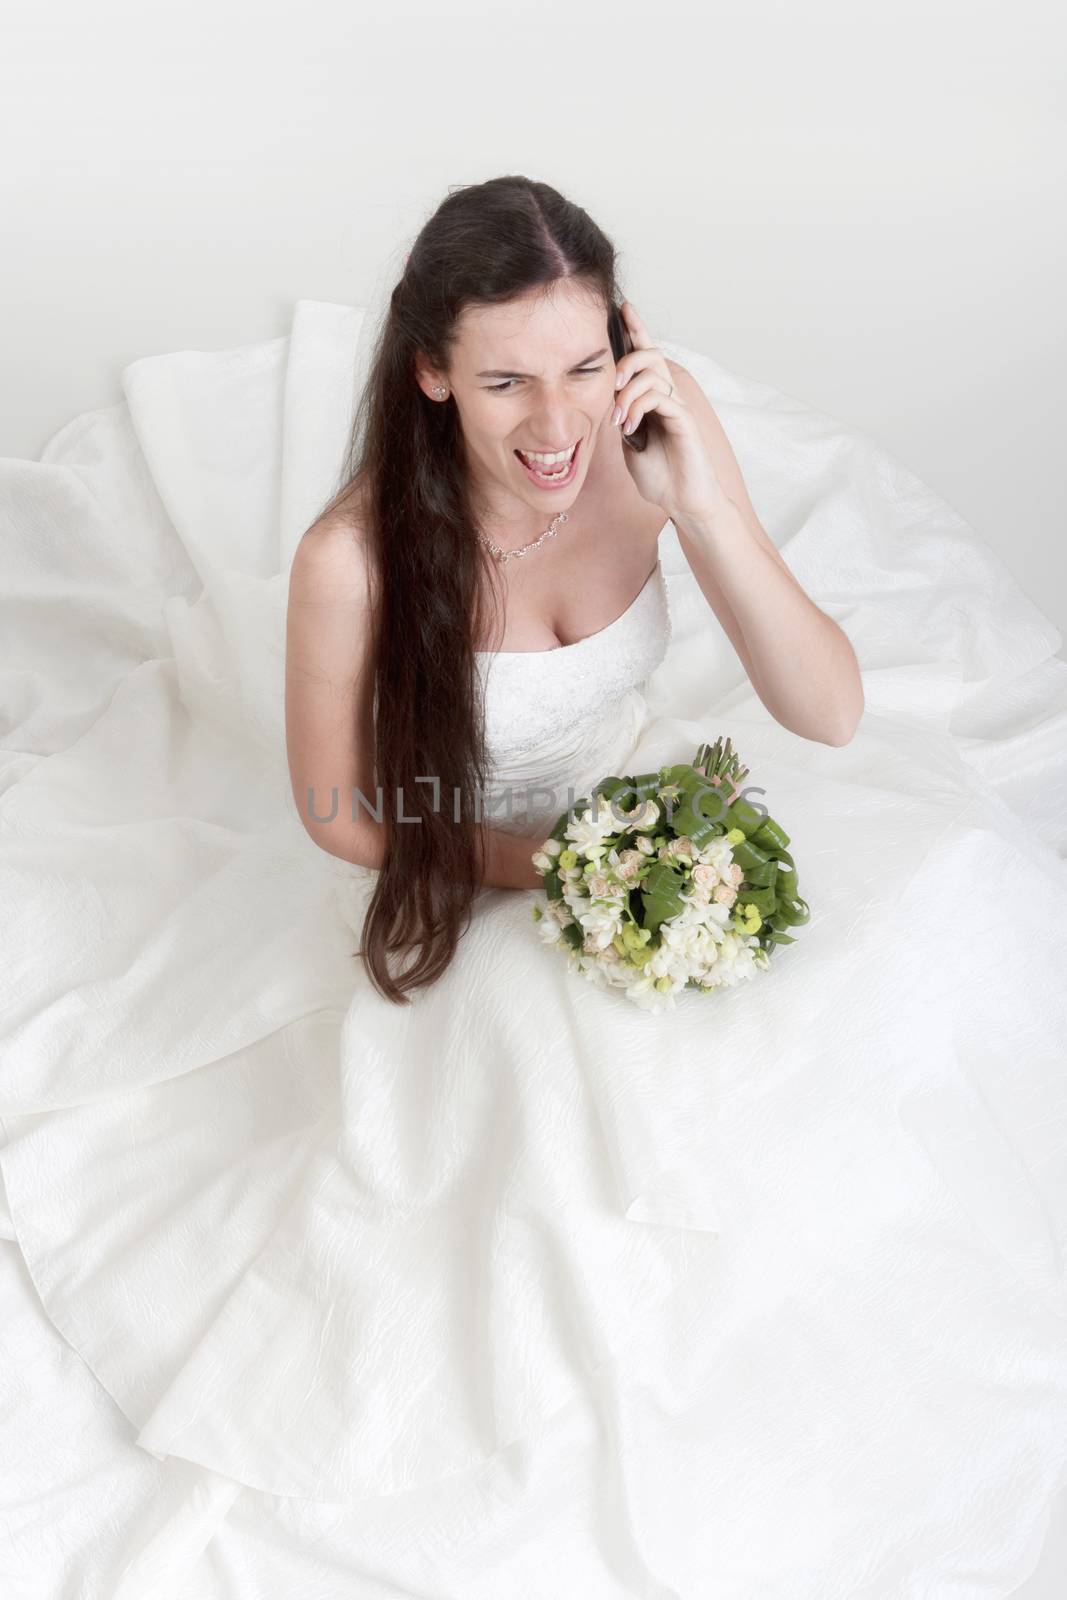 angry bride on cell phone by courtyardpix